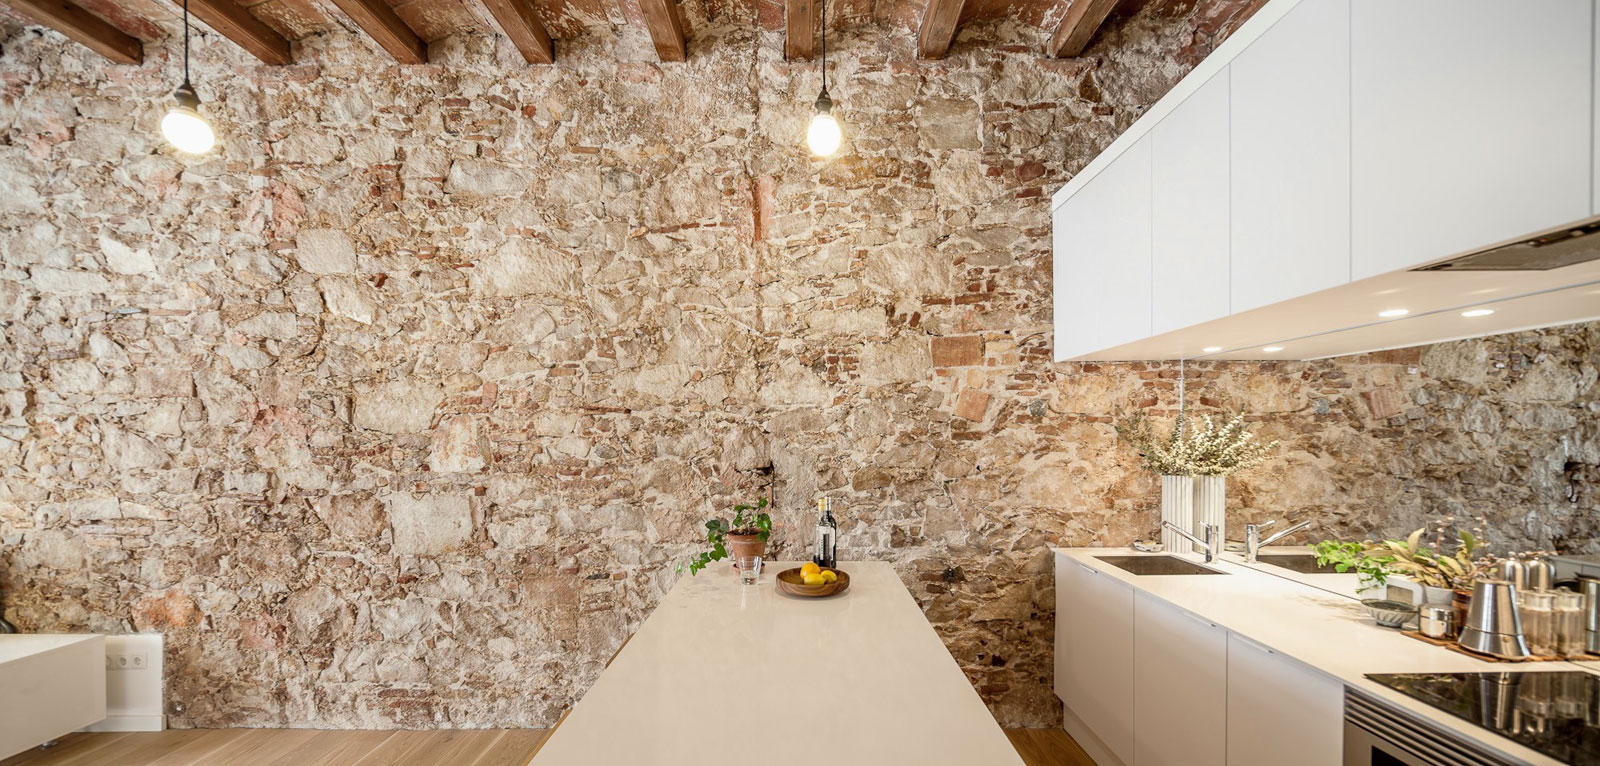 Renovation-Apartment-in-Les-Corts-kitchen-stone-wall